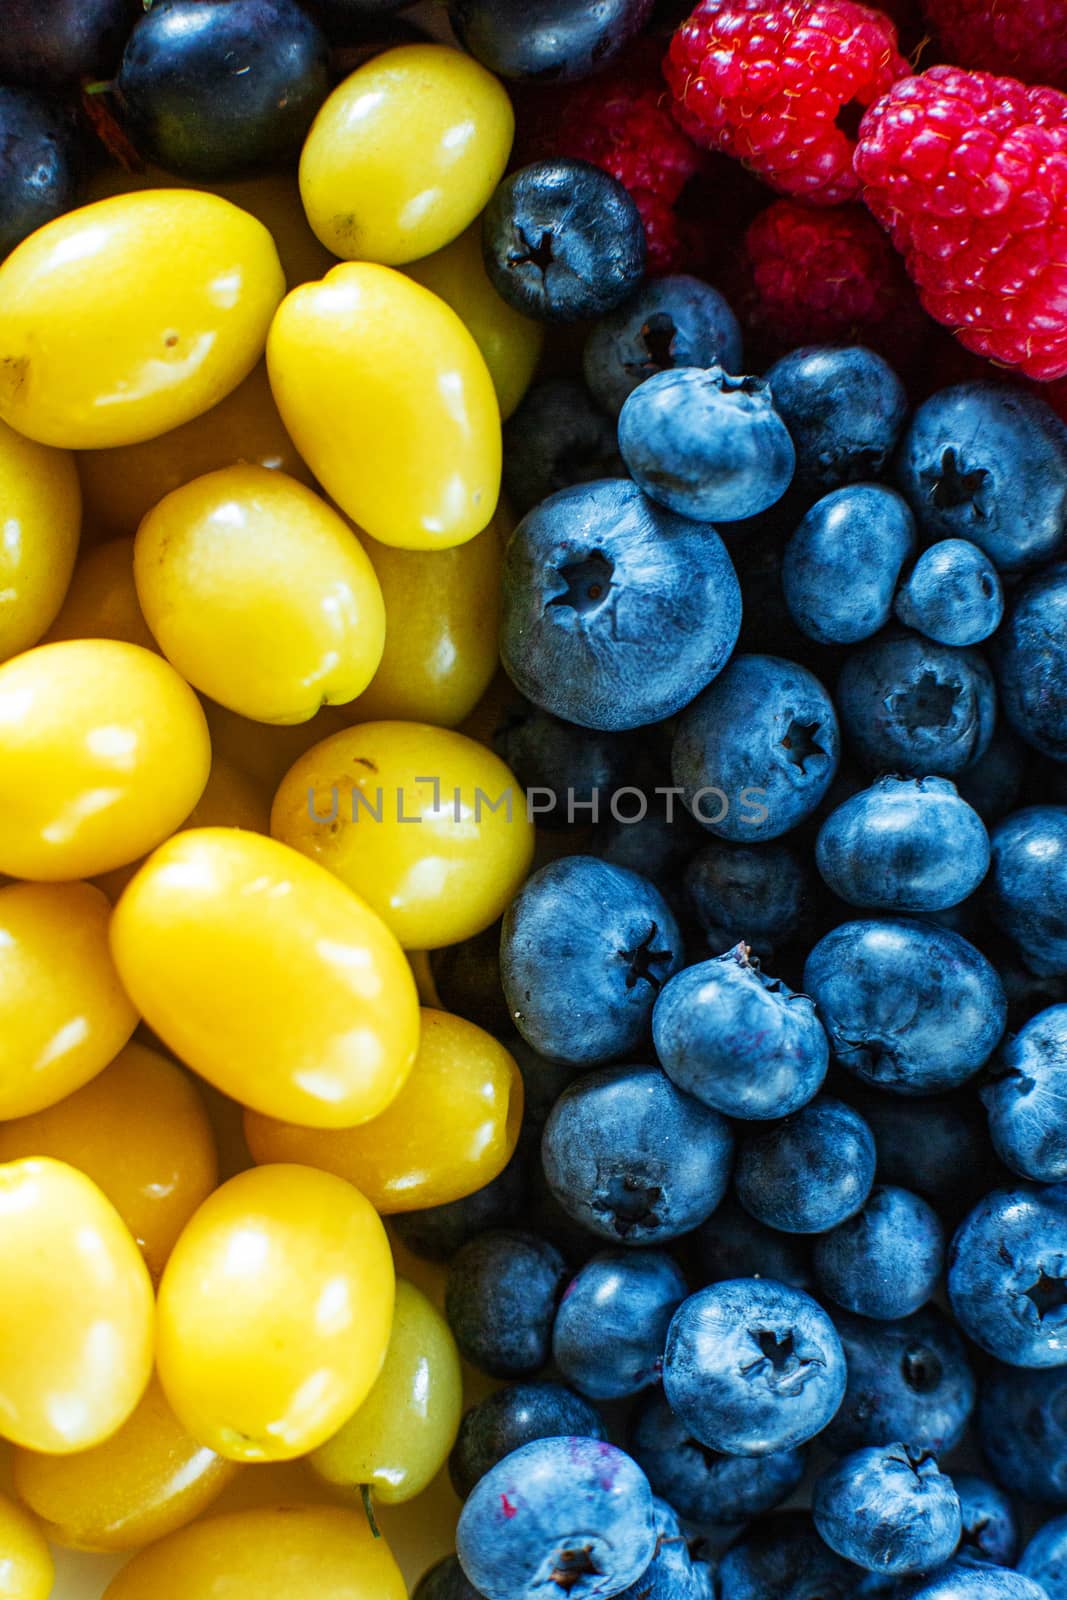 Mix of yellow and blue berries. Summer mick fruit. Berry layout.